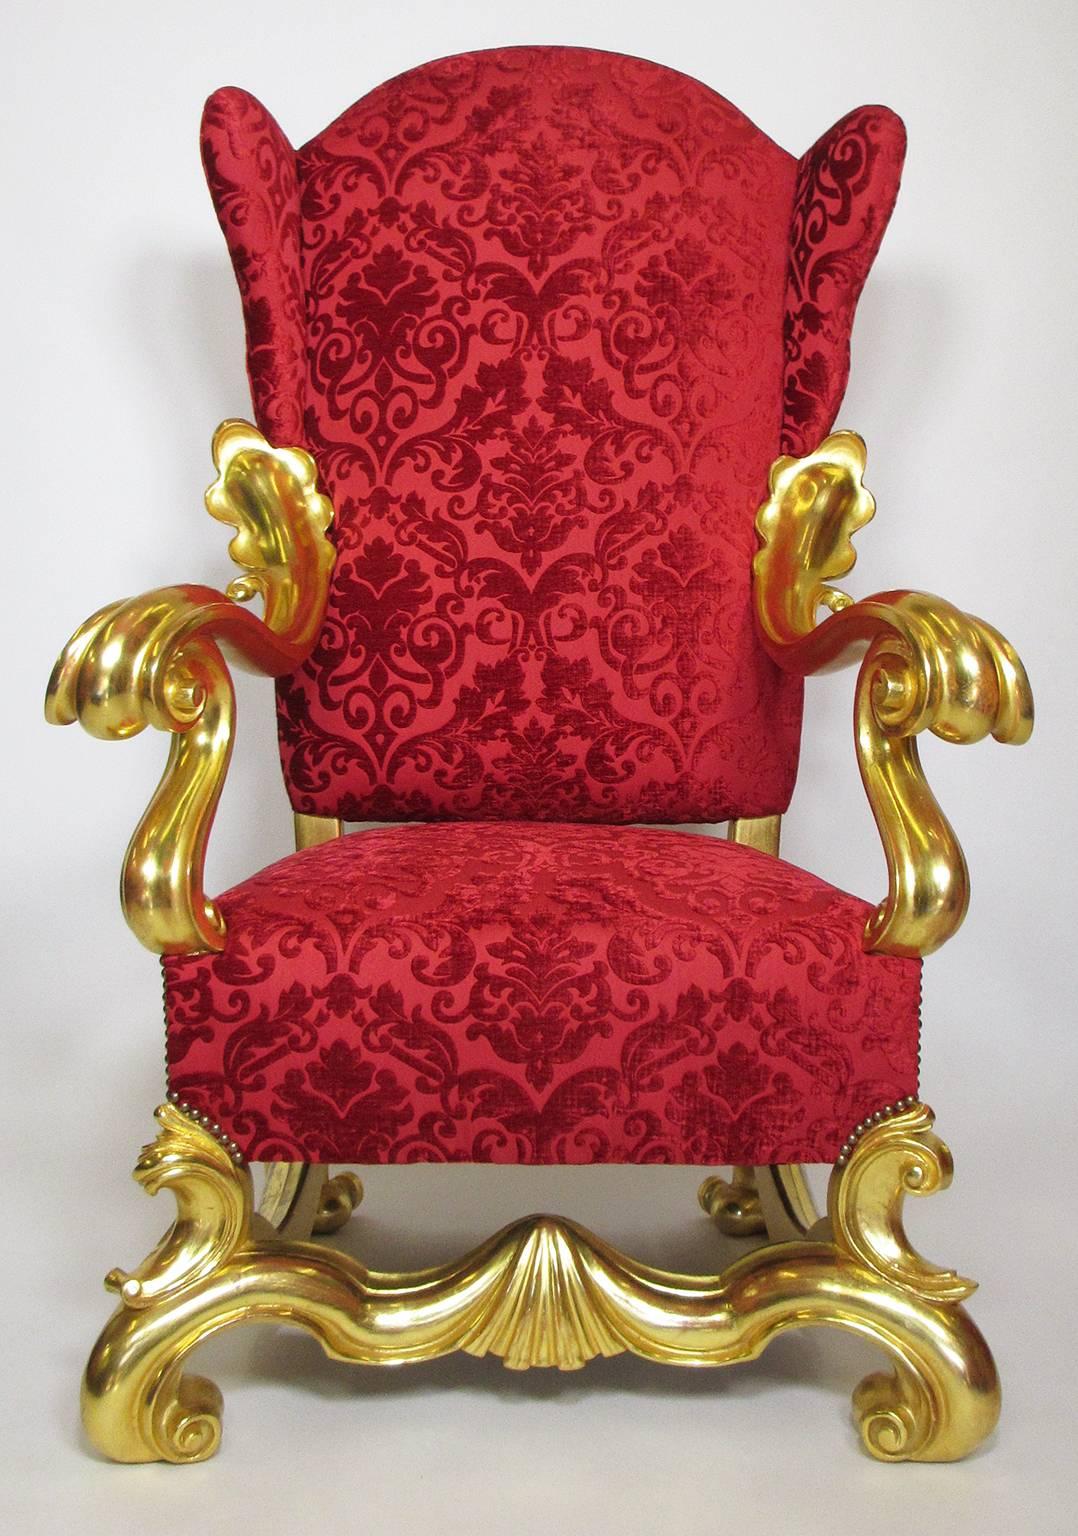 Fine pair of Italian 19th-20th century baroque style giltwood carved winged throne armchairs, each finely carved throne with scrolls and wavy armrests, on cabriole carved feet. (New upholstery and all gilt recently restored), Florence, circa